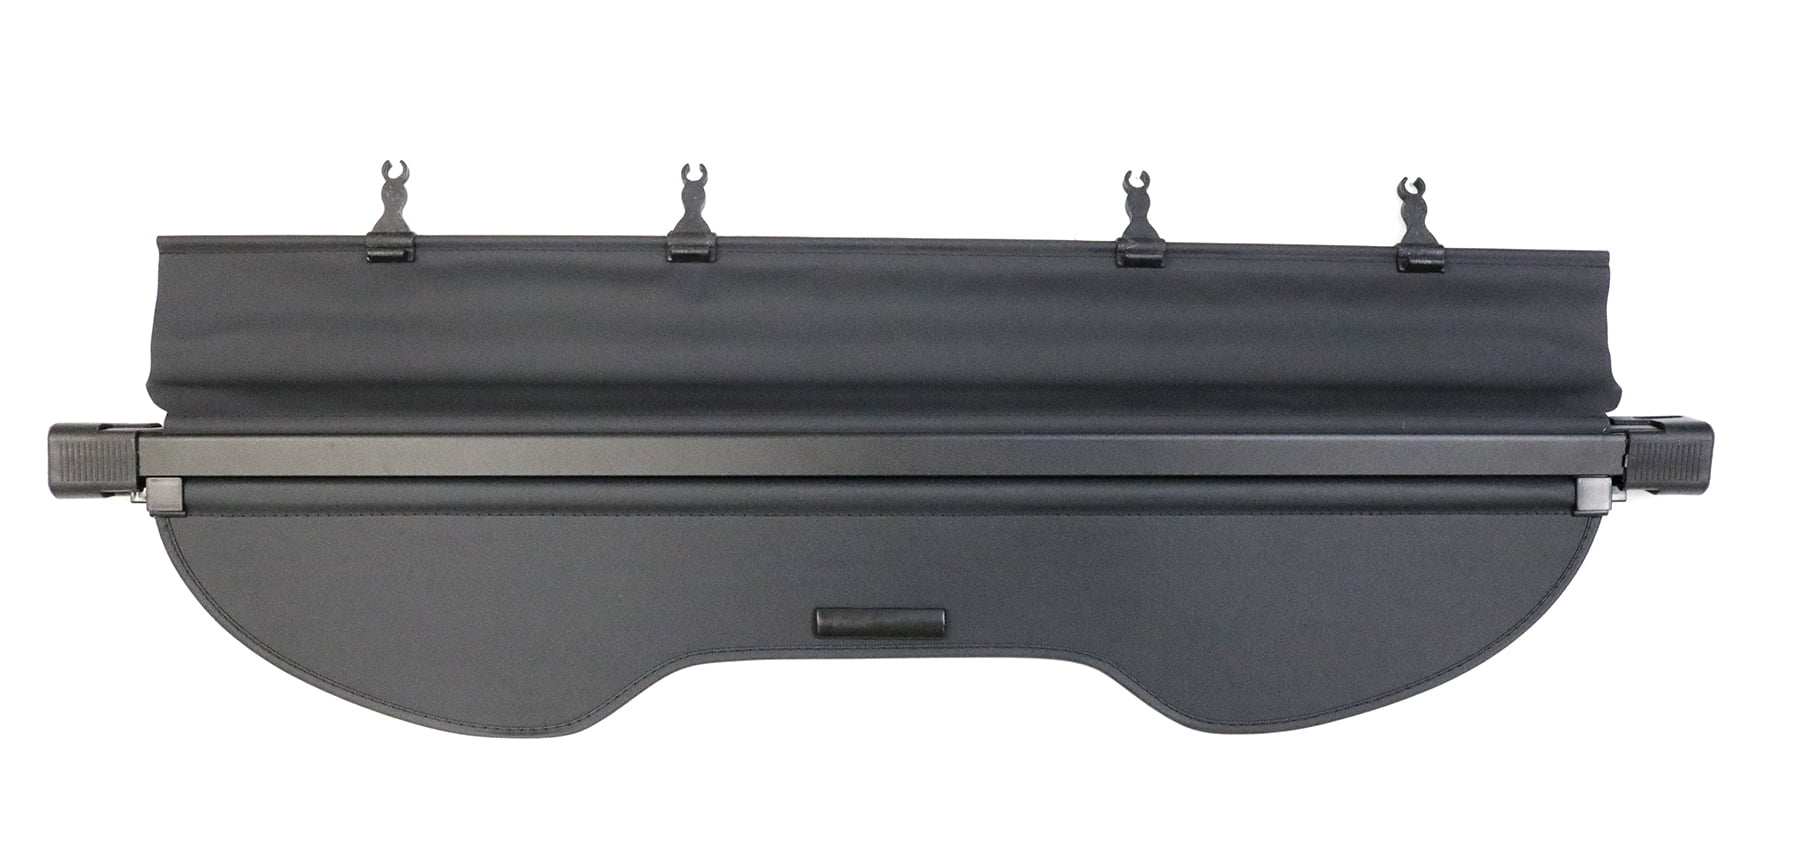 Water-repellent Cargo Cover Fit For 13-16 Ford Escape Rear Trunk Luggage Guard 